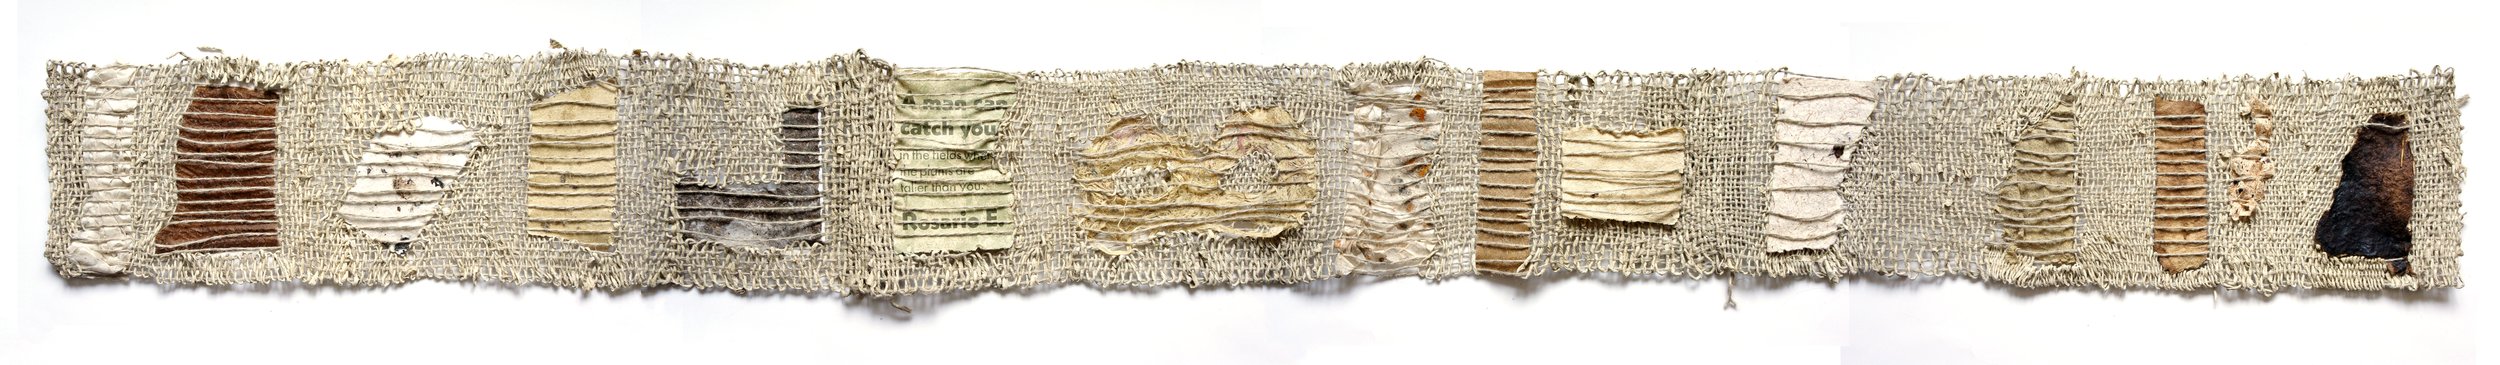   Archive, spun flax paper thread, handmade paper artwork scraps, tapestry weaving, 8 x 60 inches, 2021.  